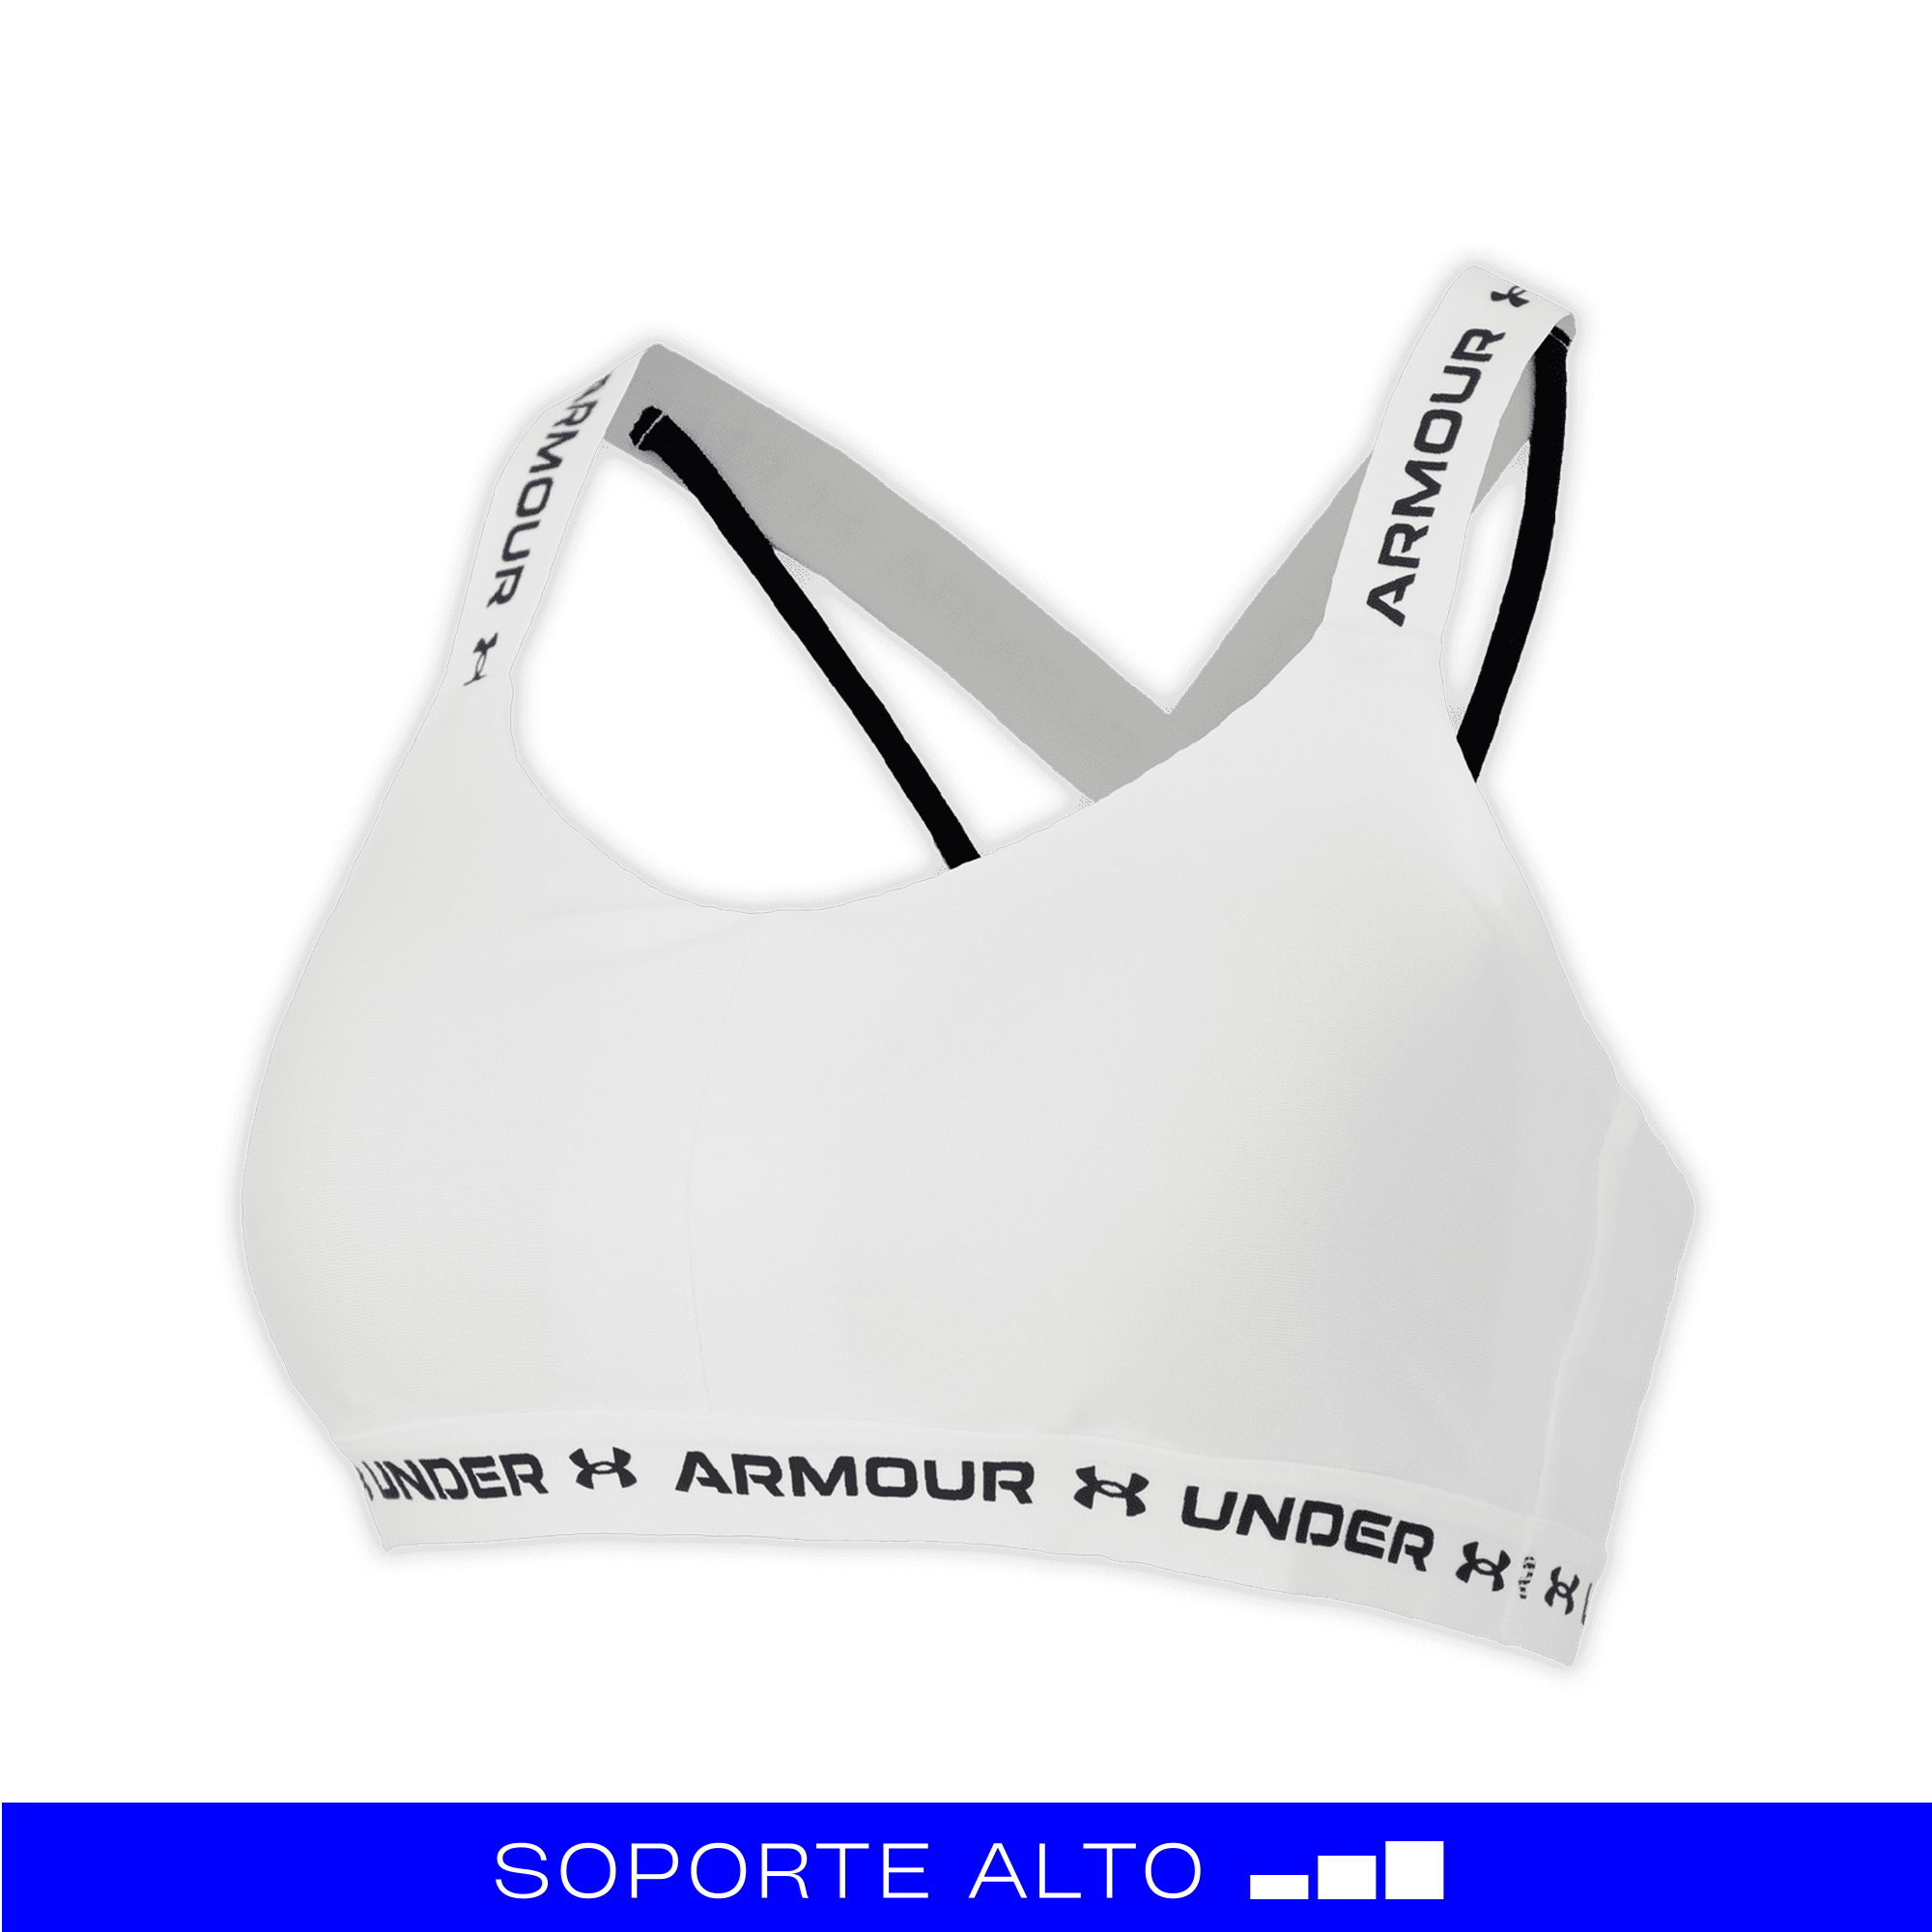 Top Deportivo Mujer Under Armour Crossback Low UNDER ARMOUR